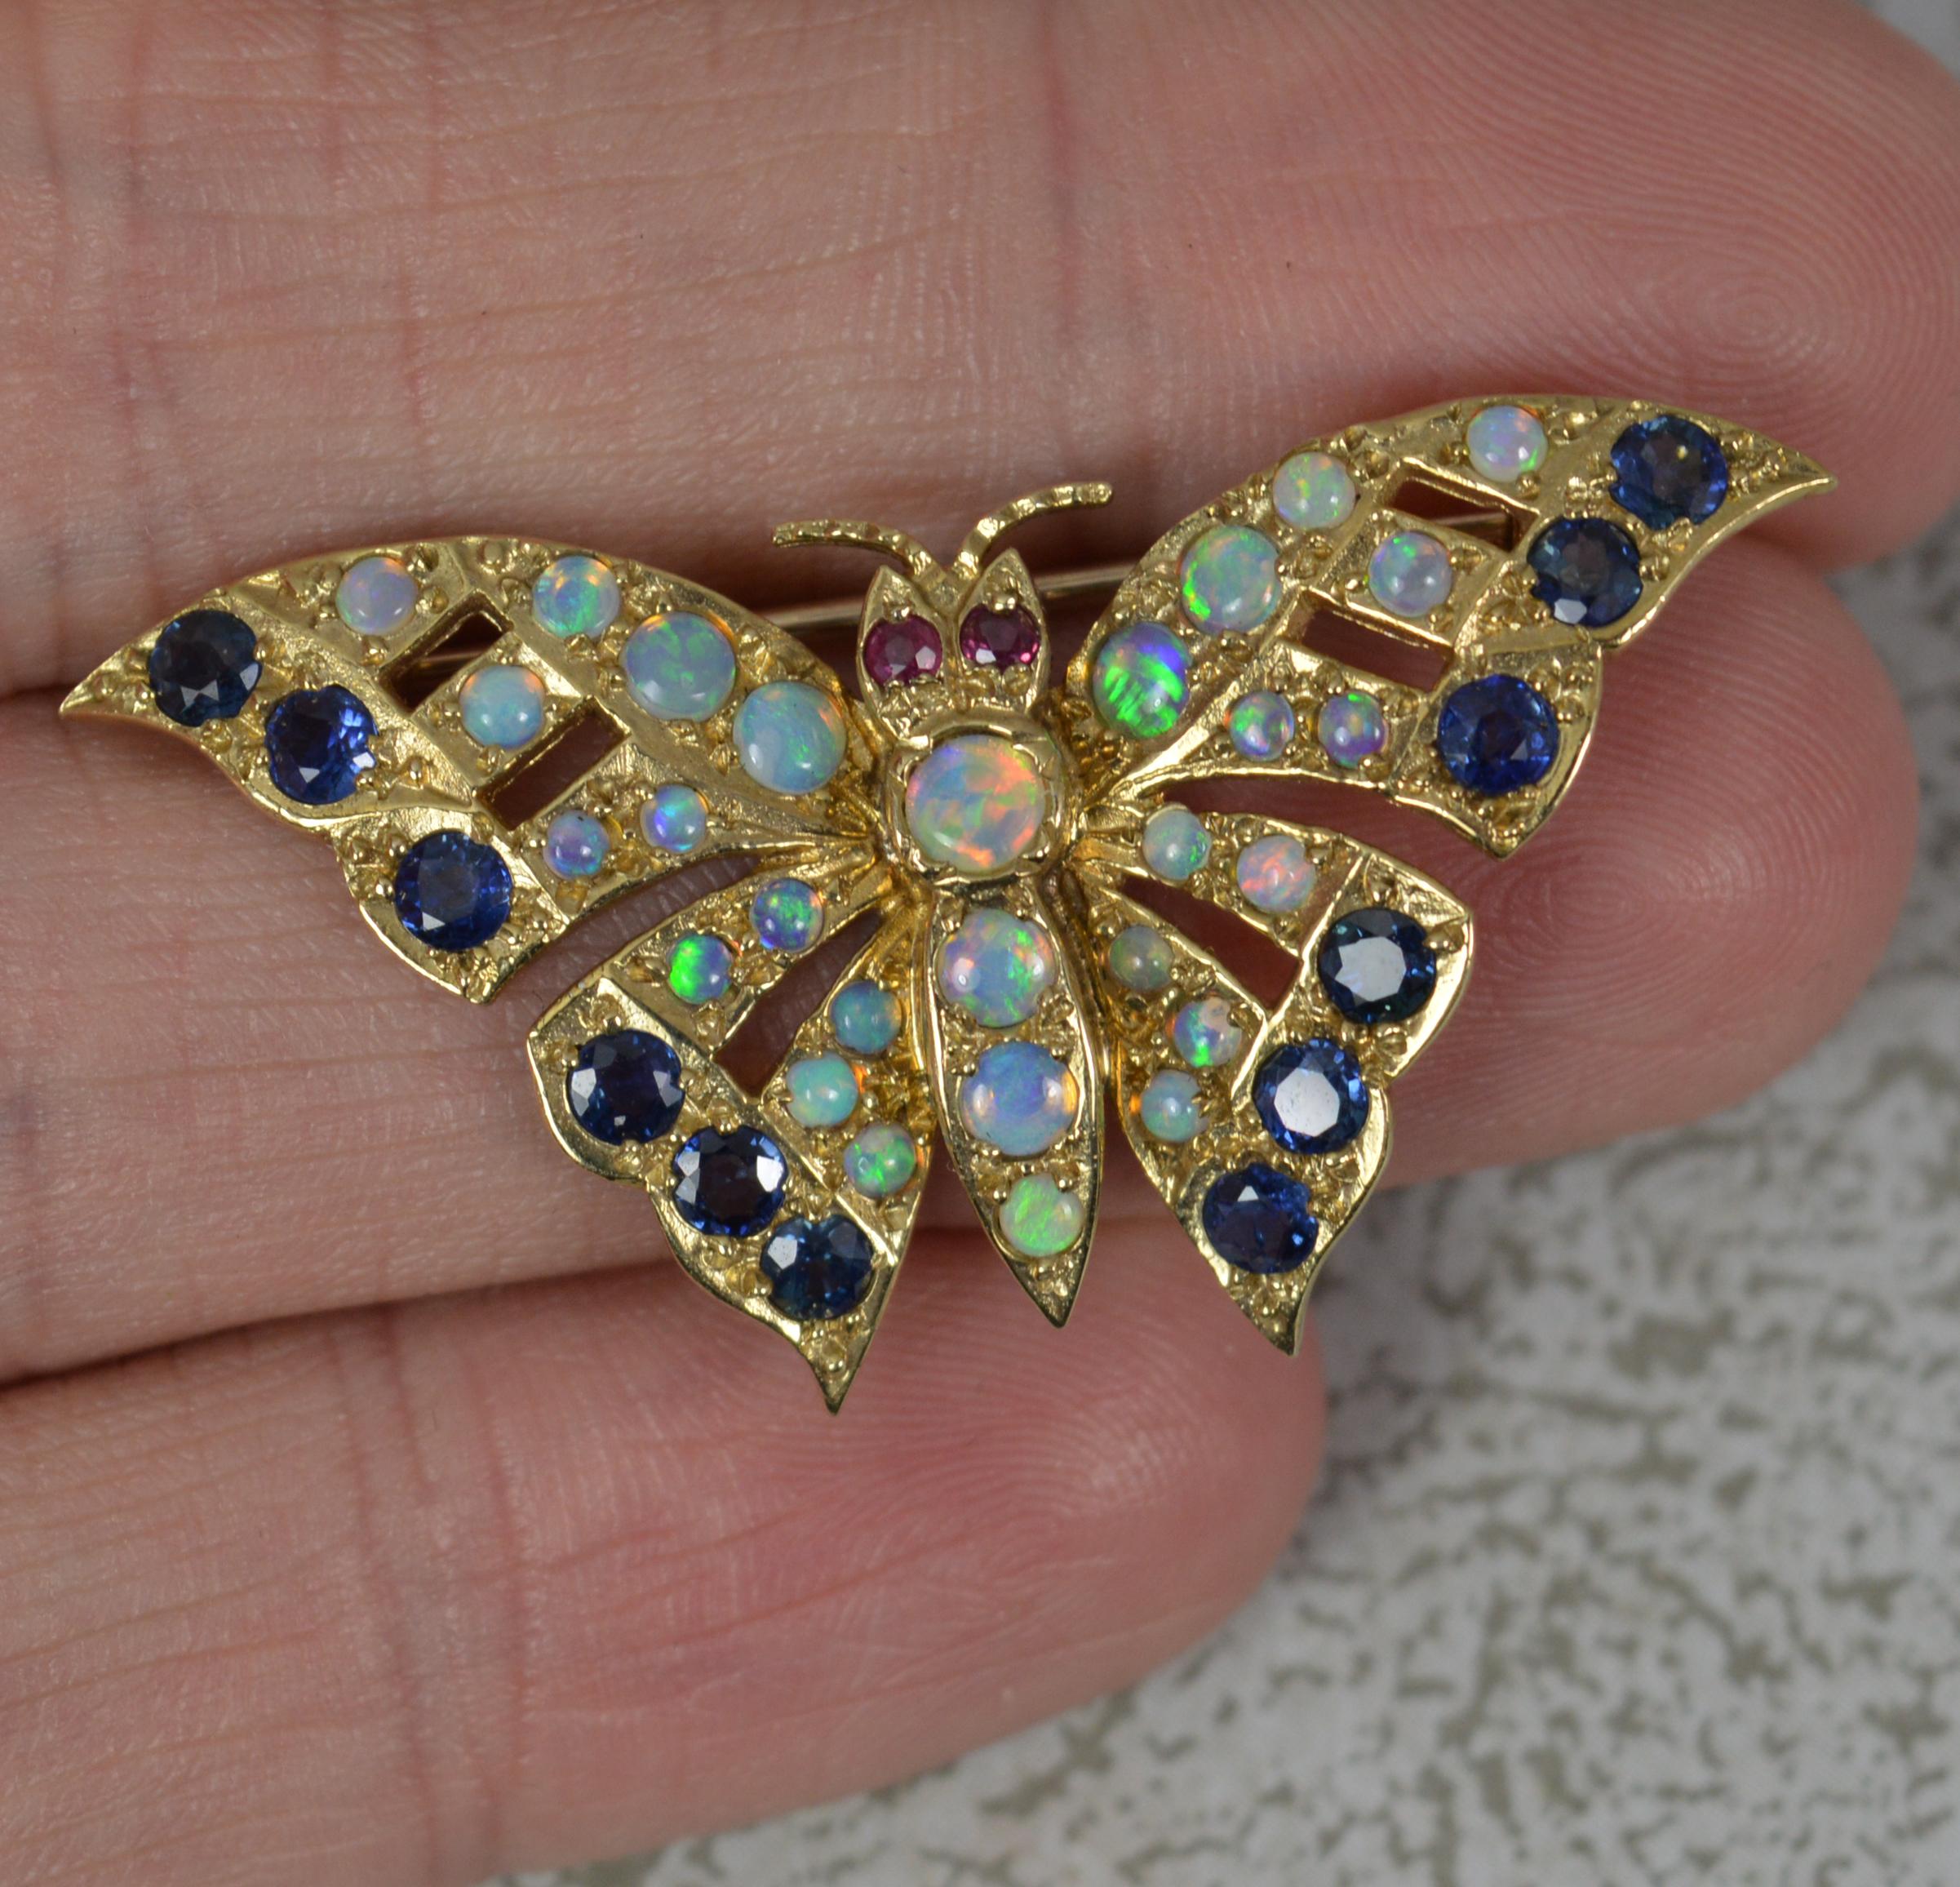 A very fine contemporary brooch of butterfly shape.
Solid 9 carat yellow gold example.
Designed with two natural rubies set to the eyes with many round opals to the body and wings with blue sapphires to the edge.

Condition ; Very good. Working pin